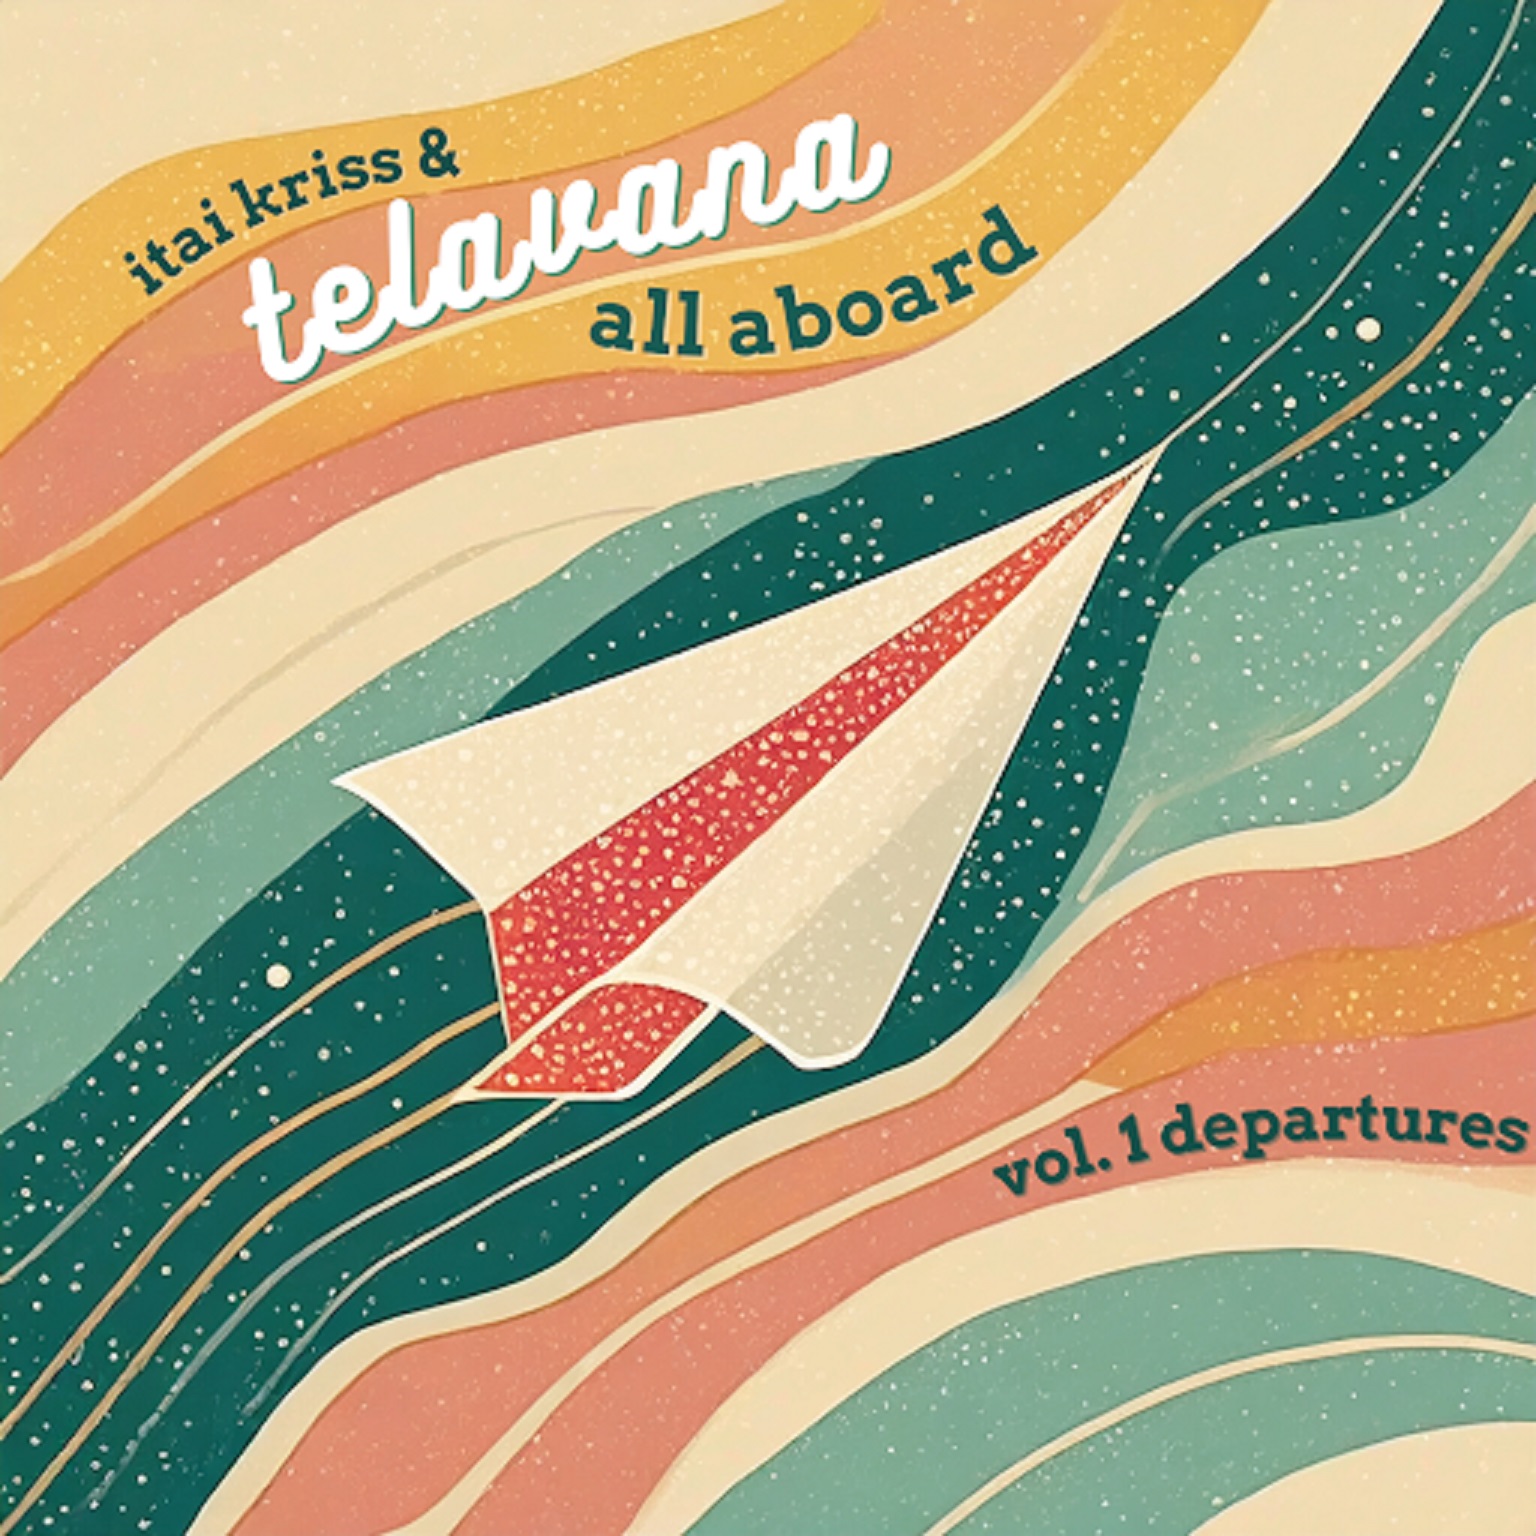 Itai Kriss and Telavana to Release 'All Aboard Vol. 1 Departures' on June 5th